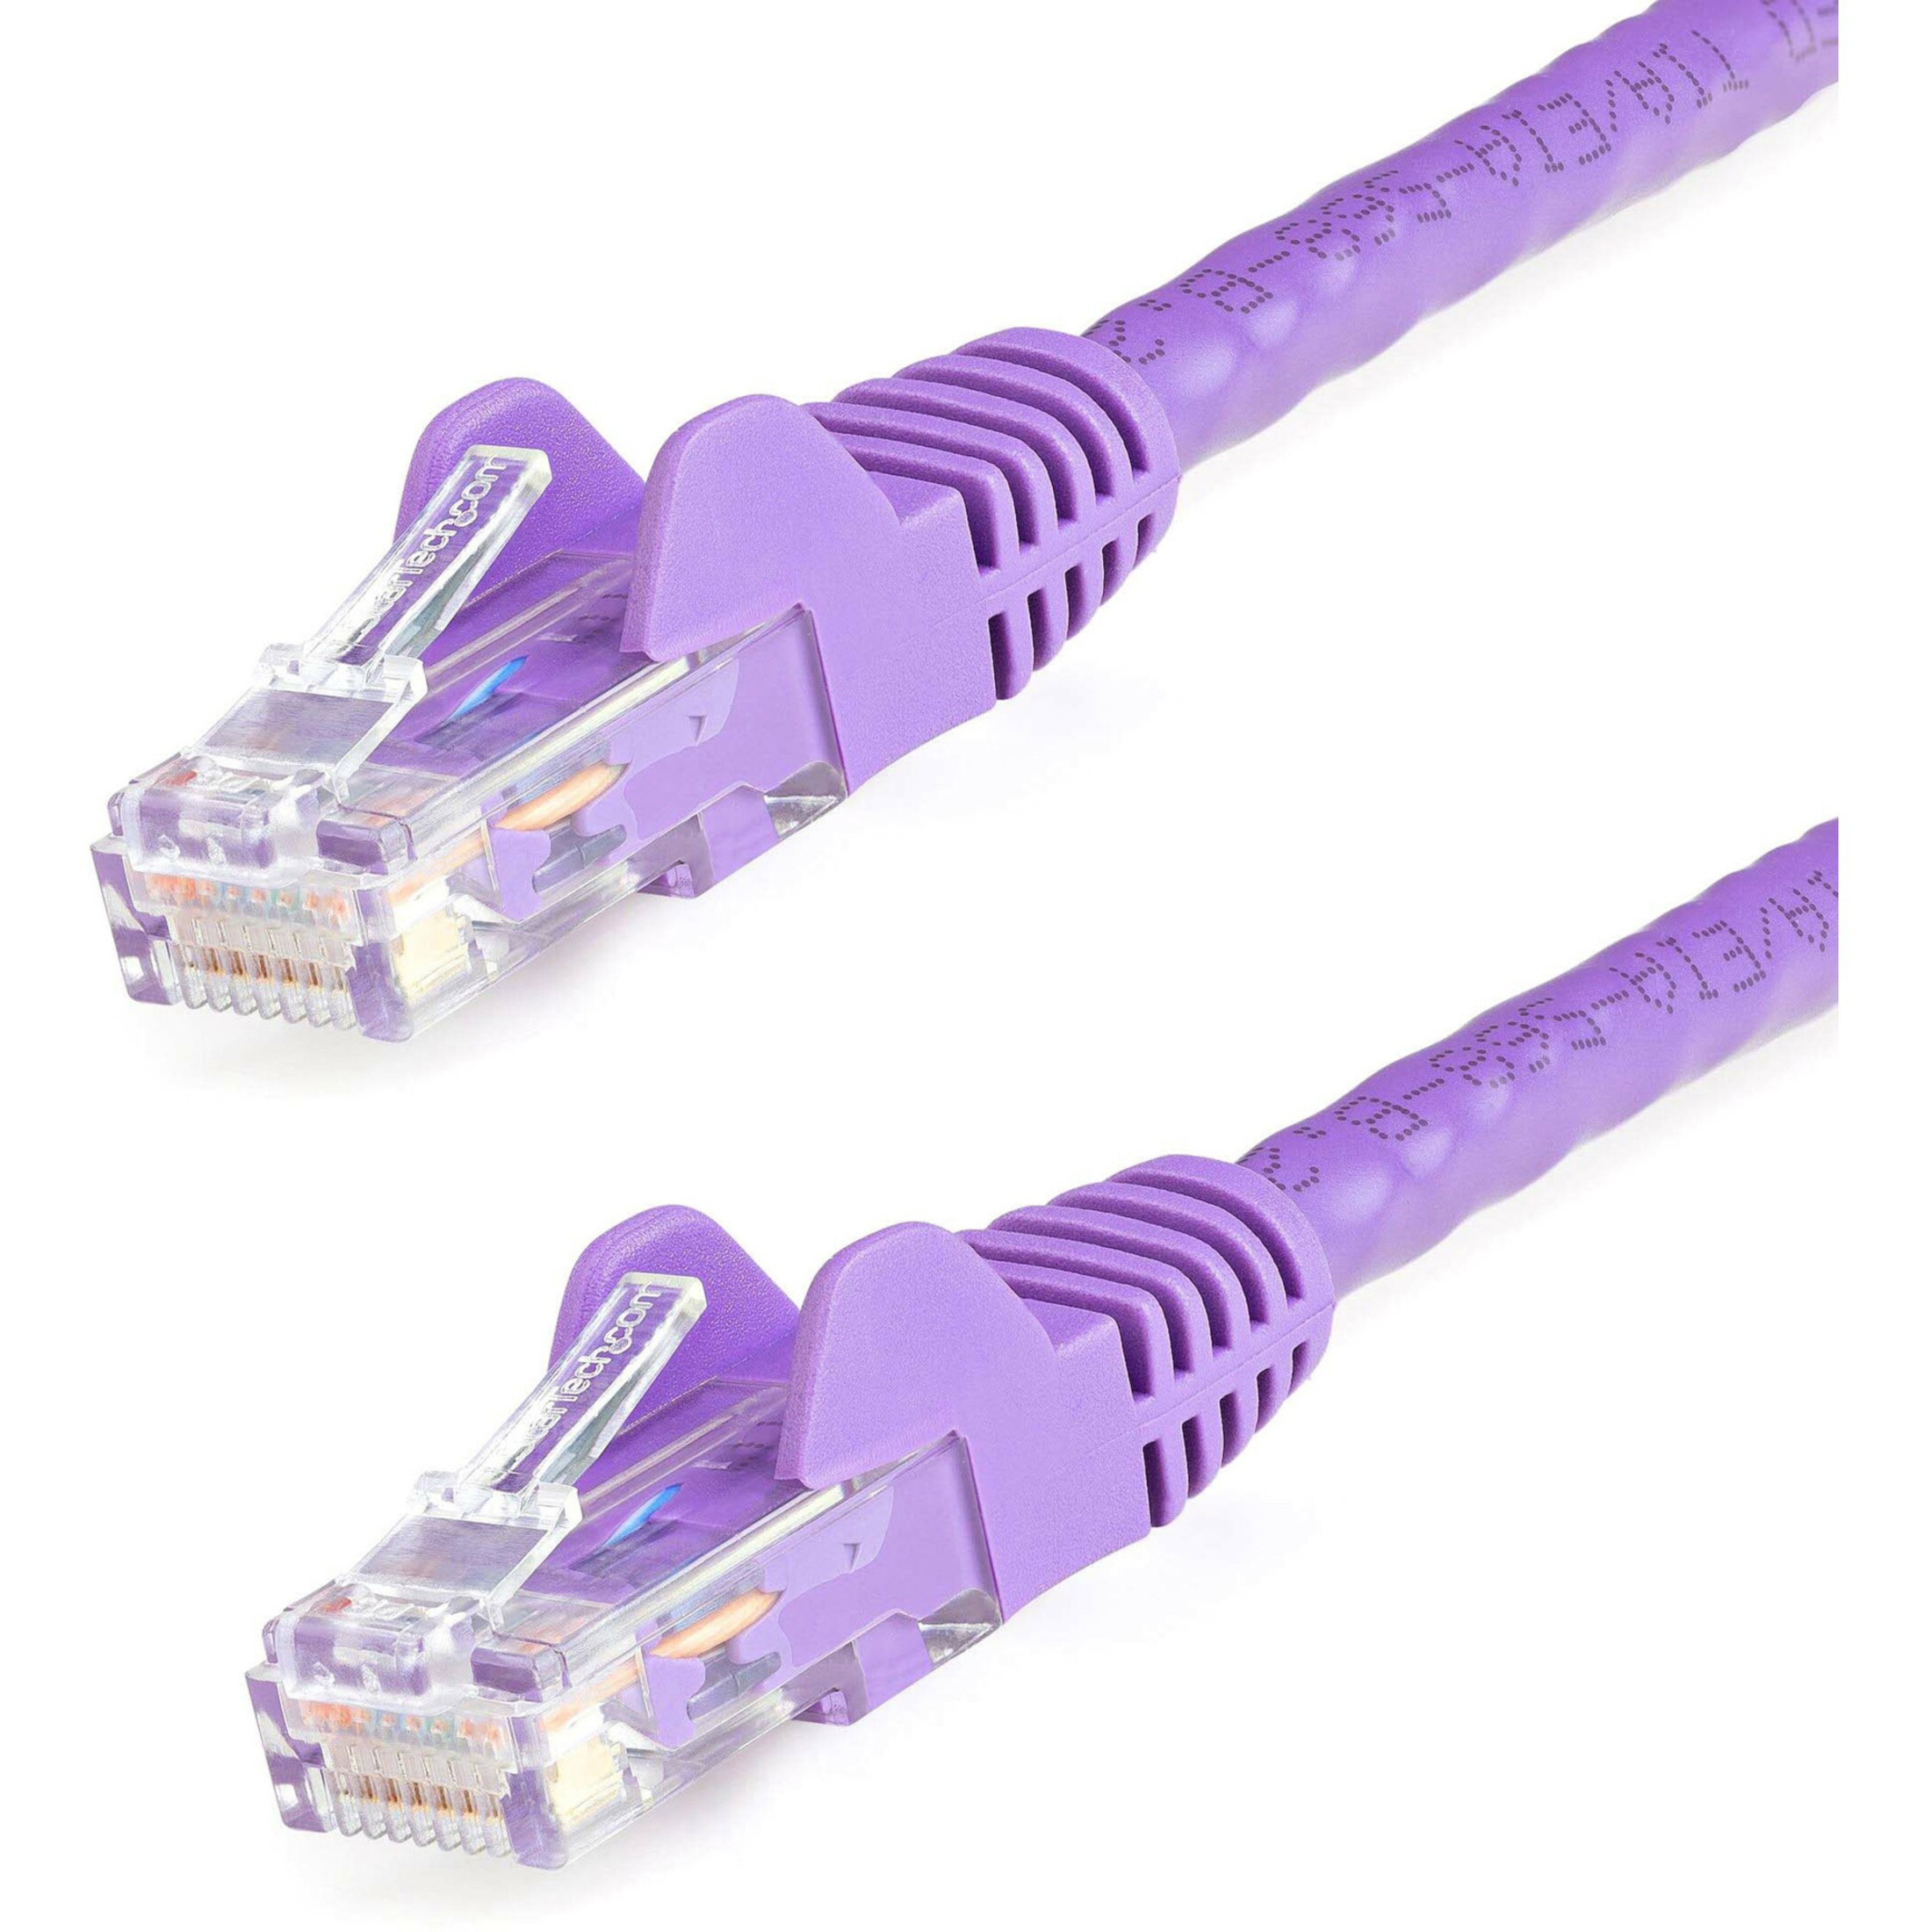 Startech .com 6ft CAT6 Ethernet CablePurple Snagless Gigabit100W PoE UTP 650MHz Category 6 Patch Cord UL Certified Wiring/TIA6ft Purp… N6PATCH6PL